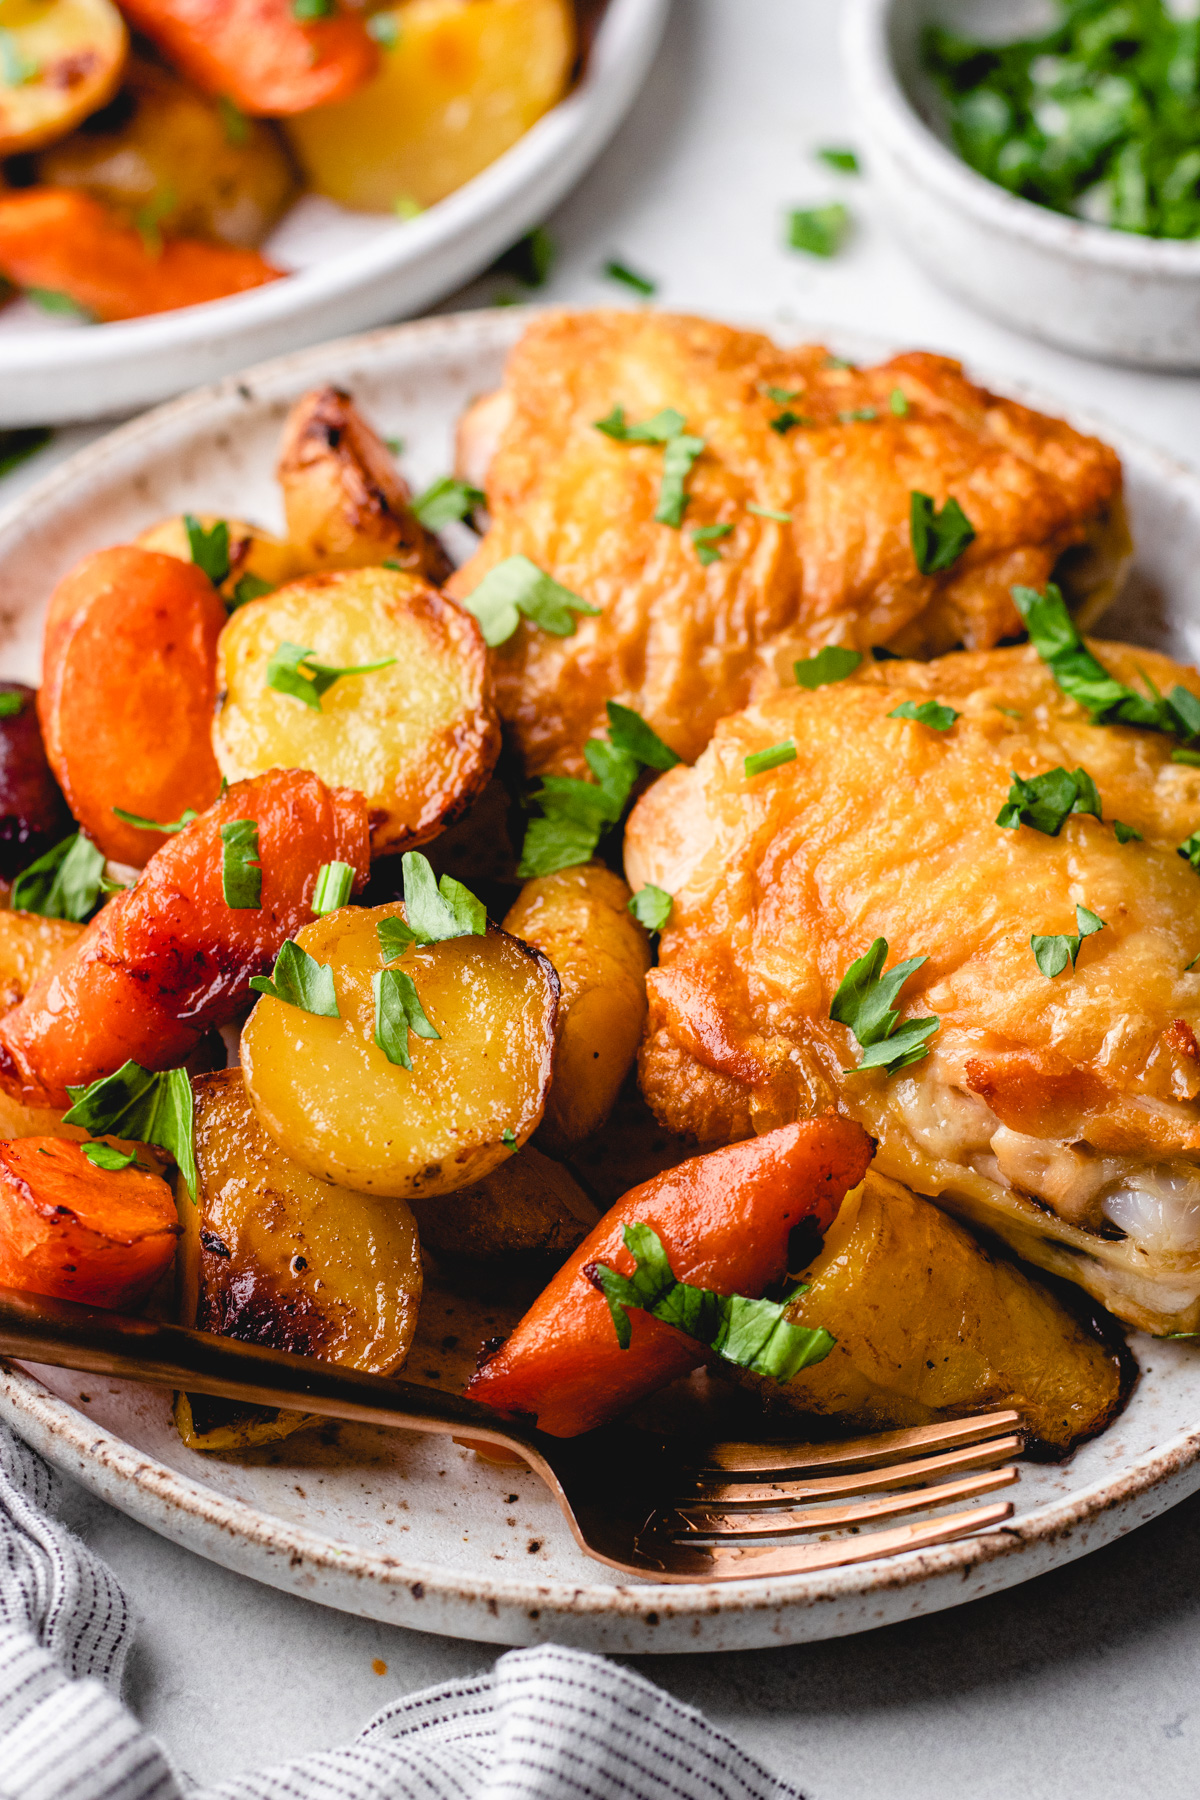 Roasted chicken thighs with carrots and potatoes on a plate.